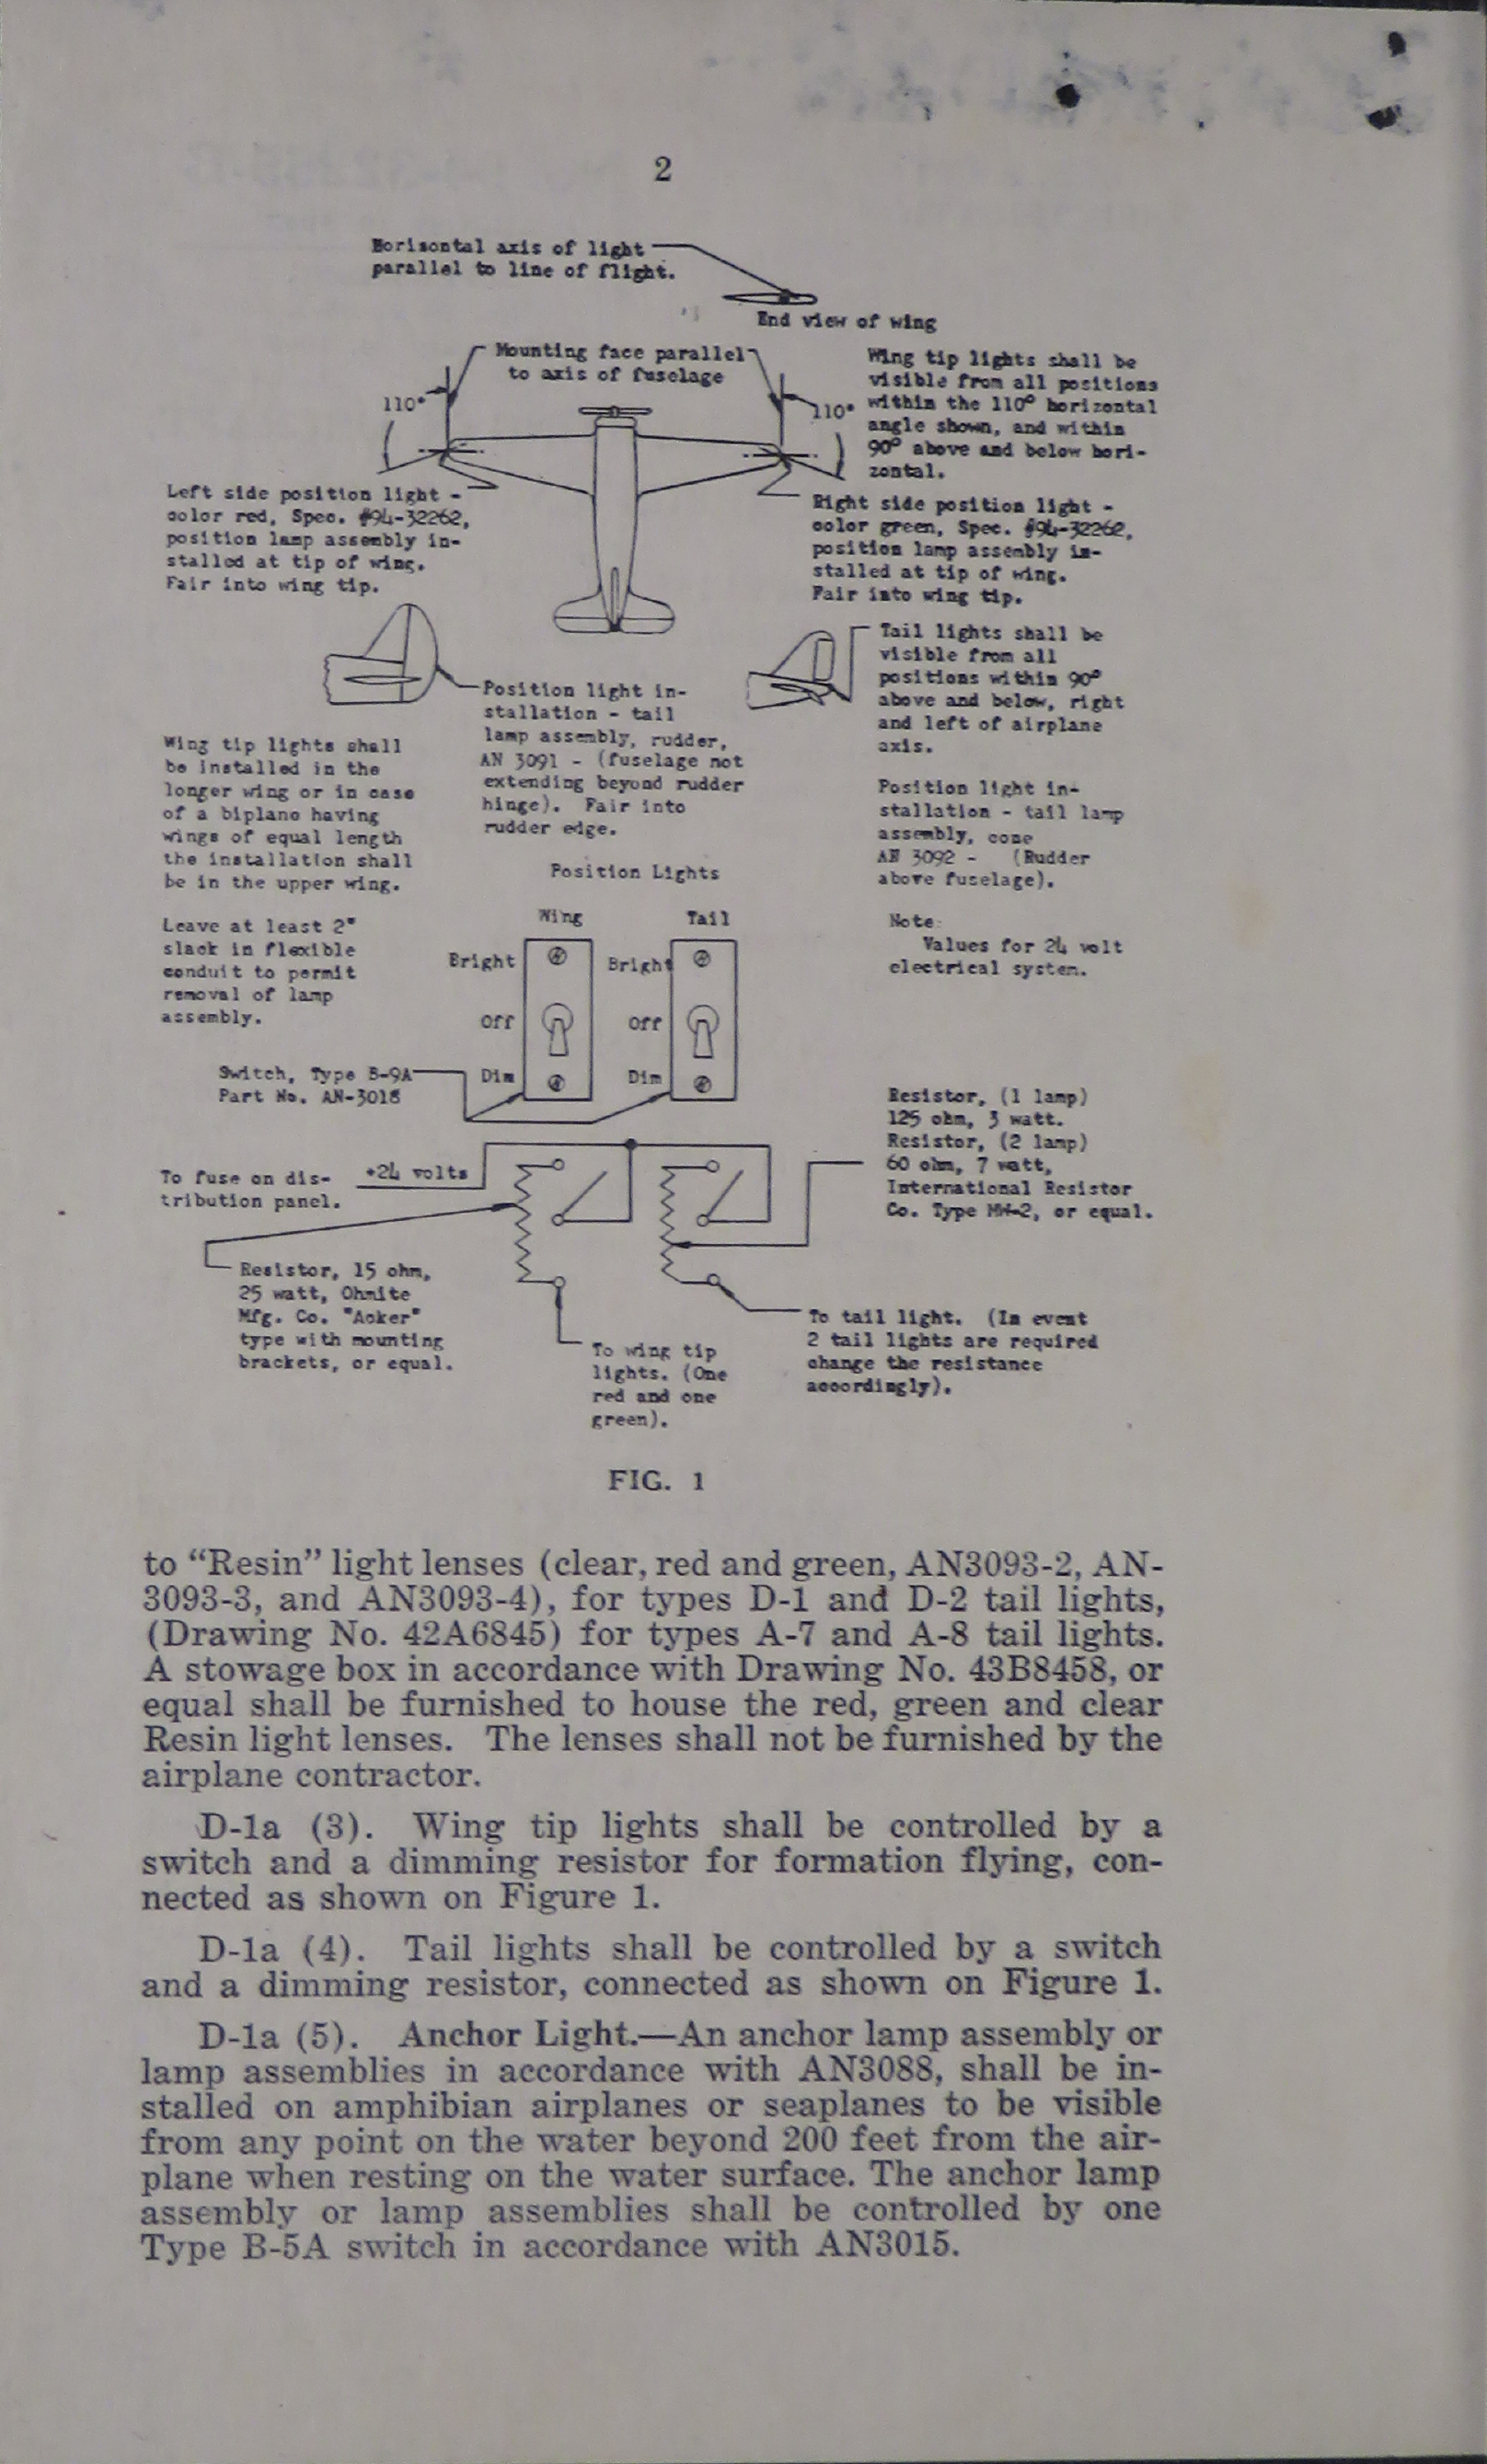 Sample page 2 from AirCorps Library document: General Specification for Installation of Lighting in Aircraft